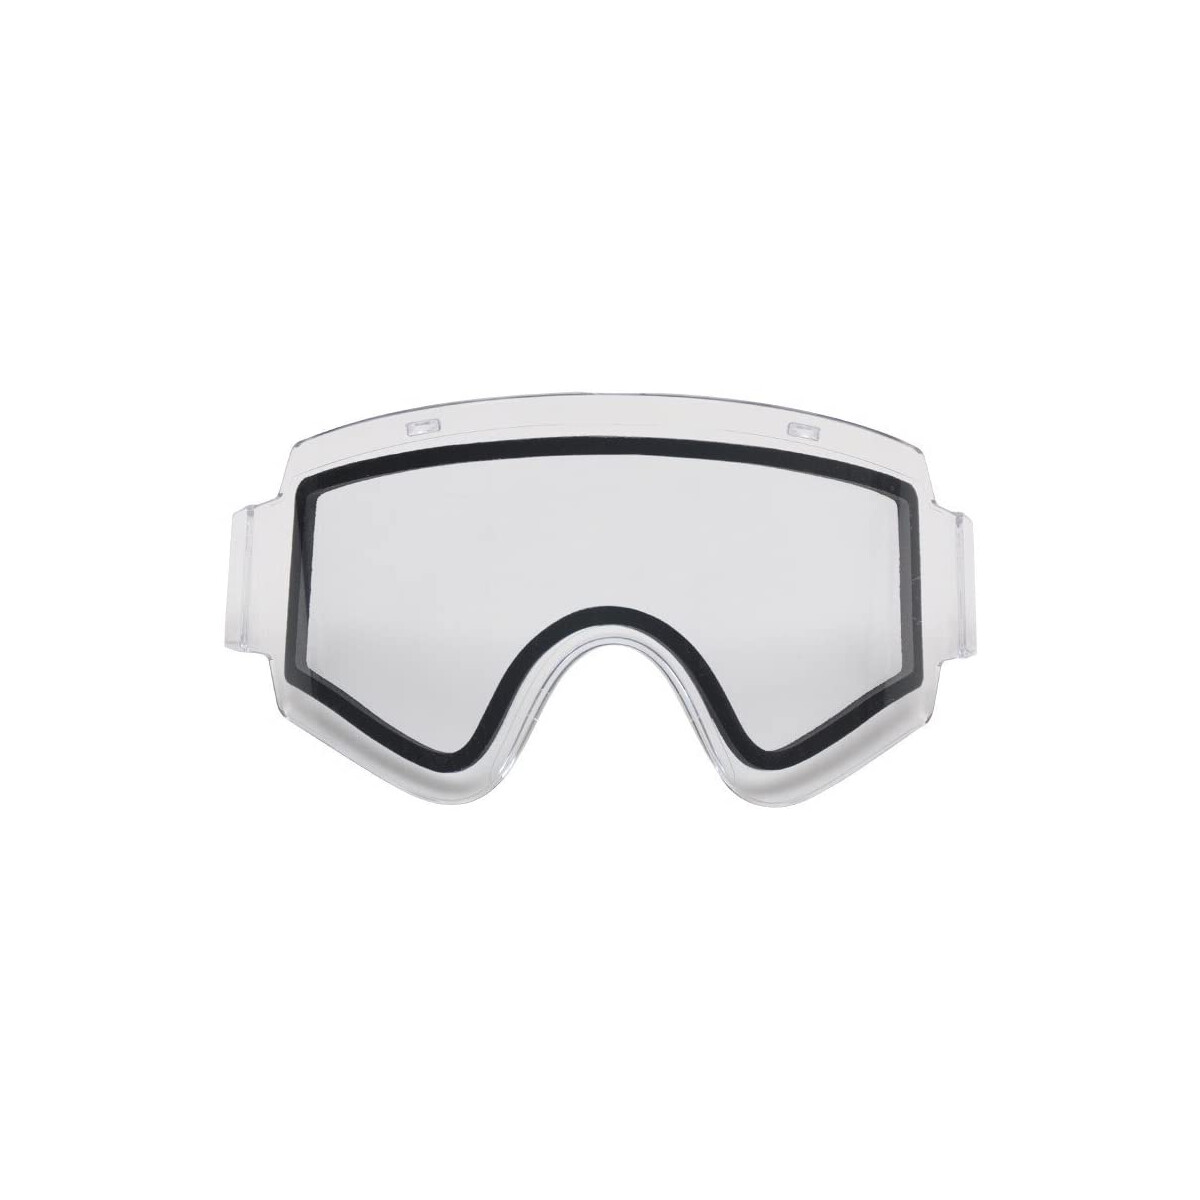 V-Force Armor Thermal Lens Clear